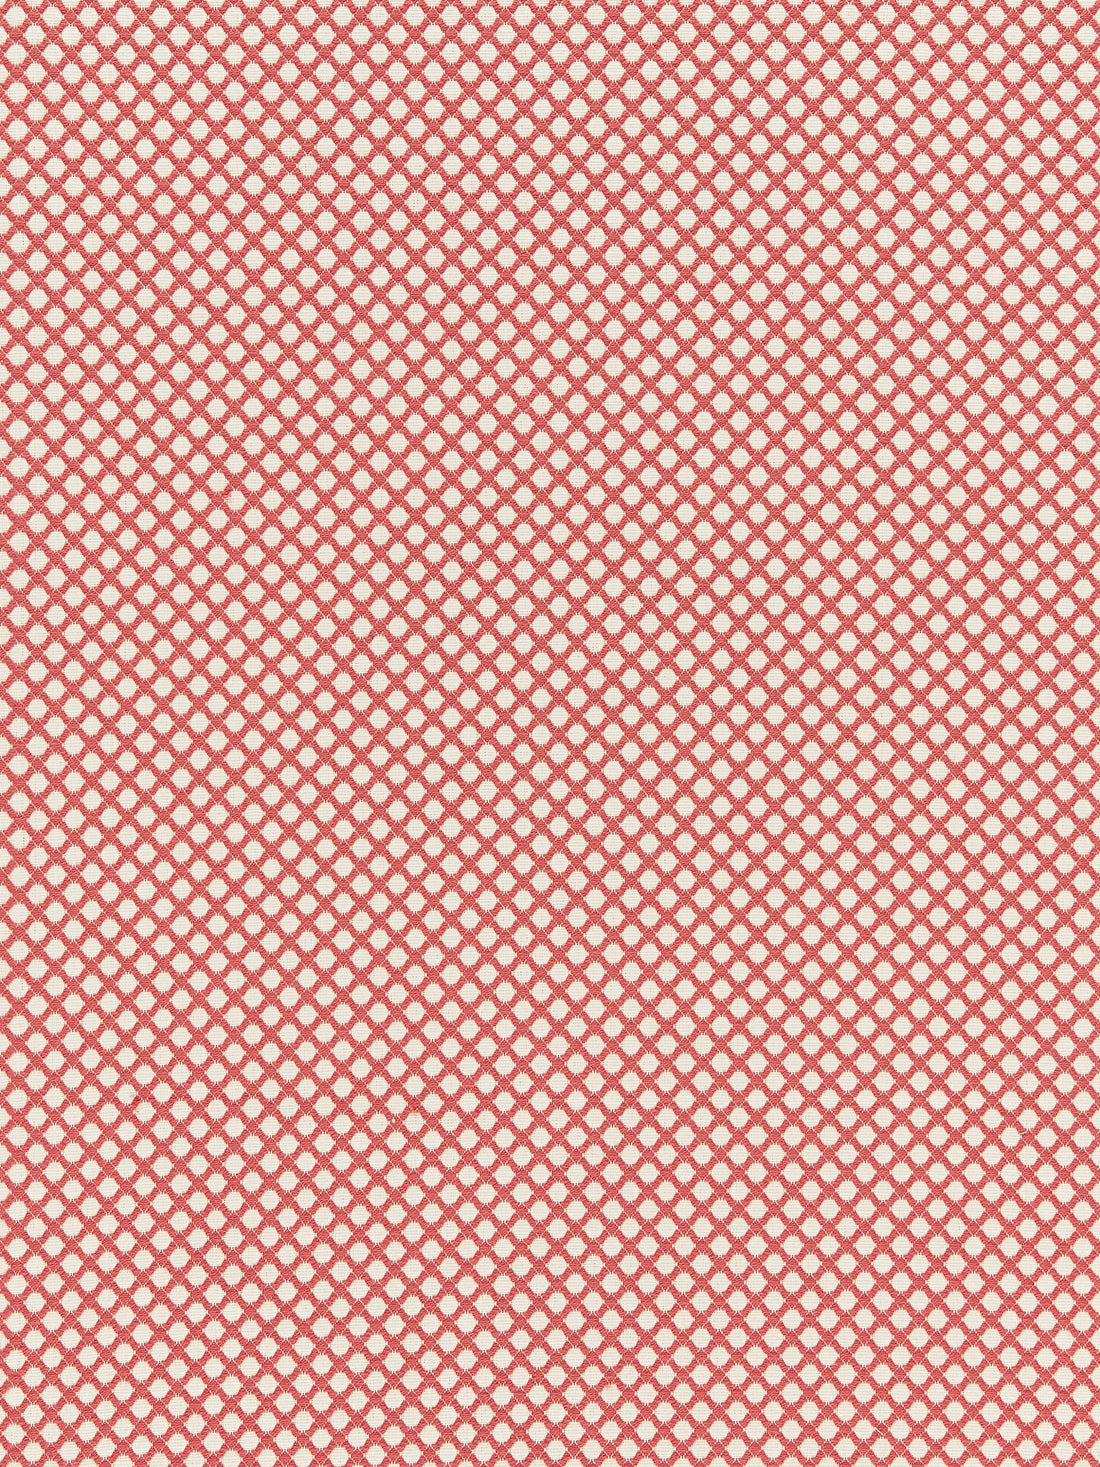 Bellaire Trellis fabric in coral color - pattern number BK 0004K65121 - by Scalamandre in the Old World Weavers collection